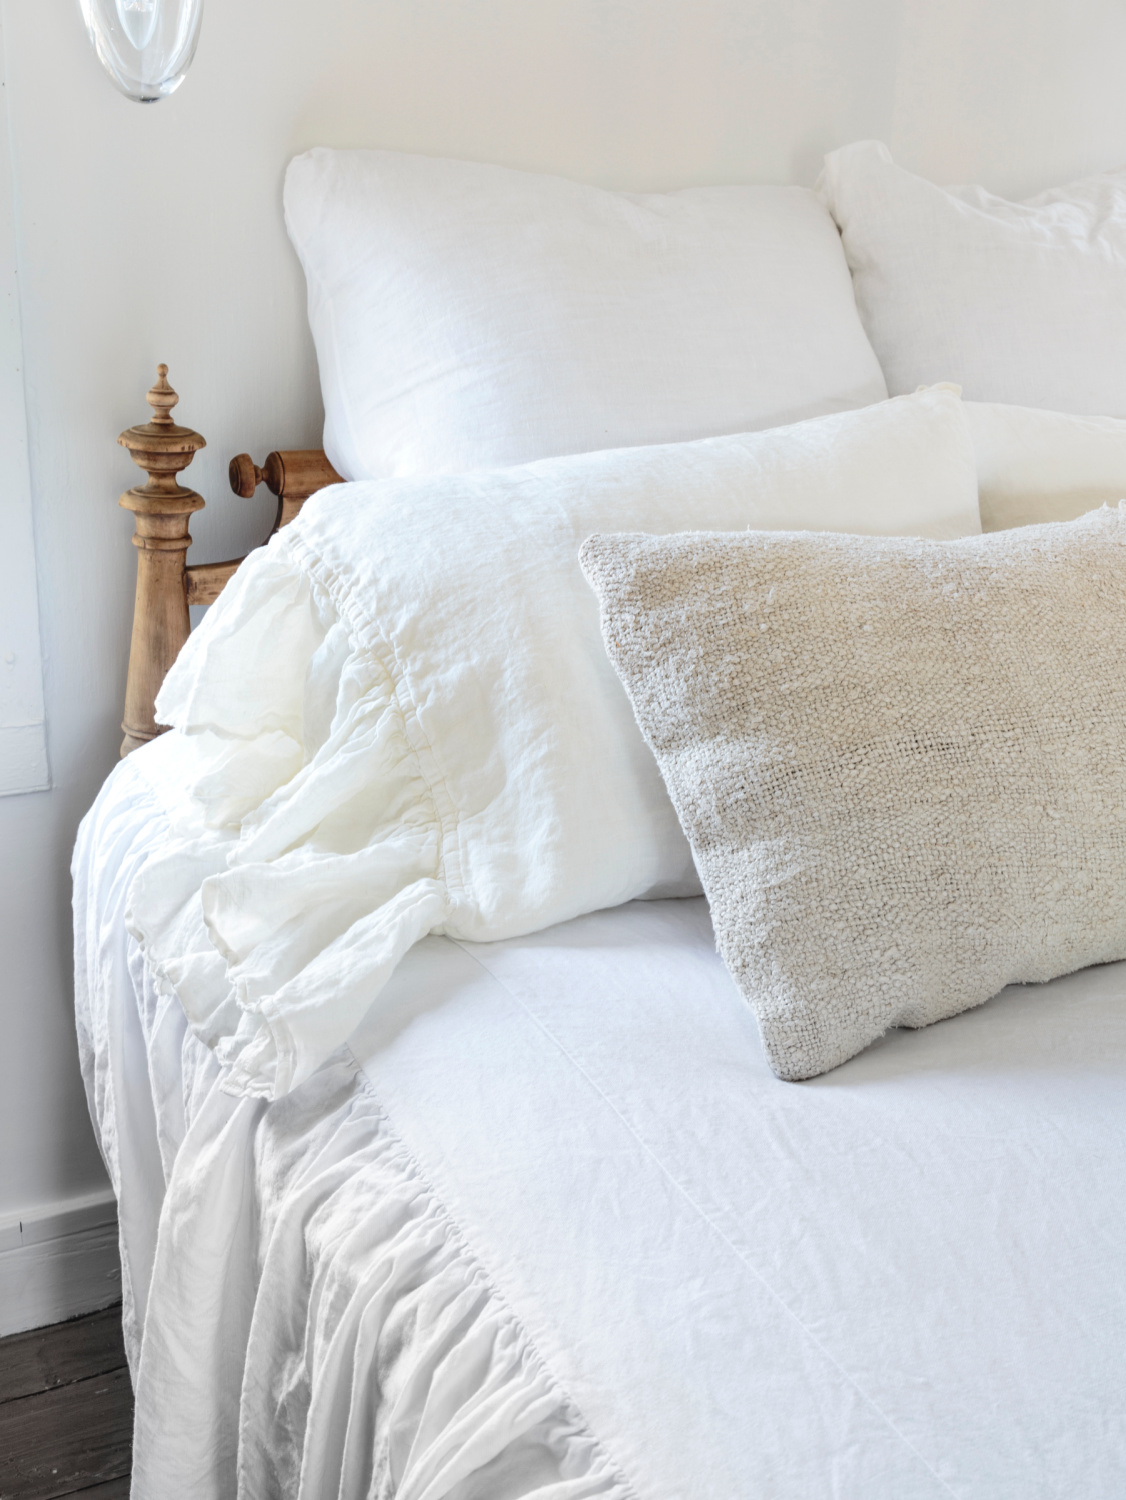 Sumptuous white bedding in bedroom from Fifi O'Neill's SHADES OF WHITE. #fifioneill